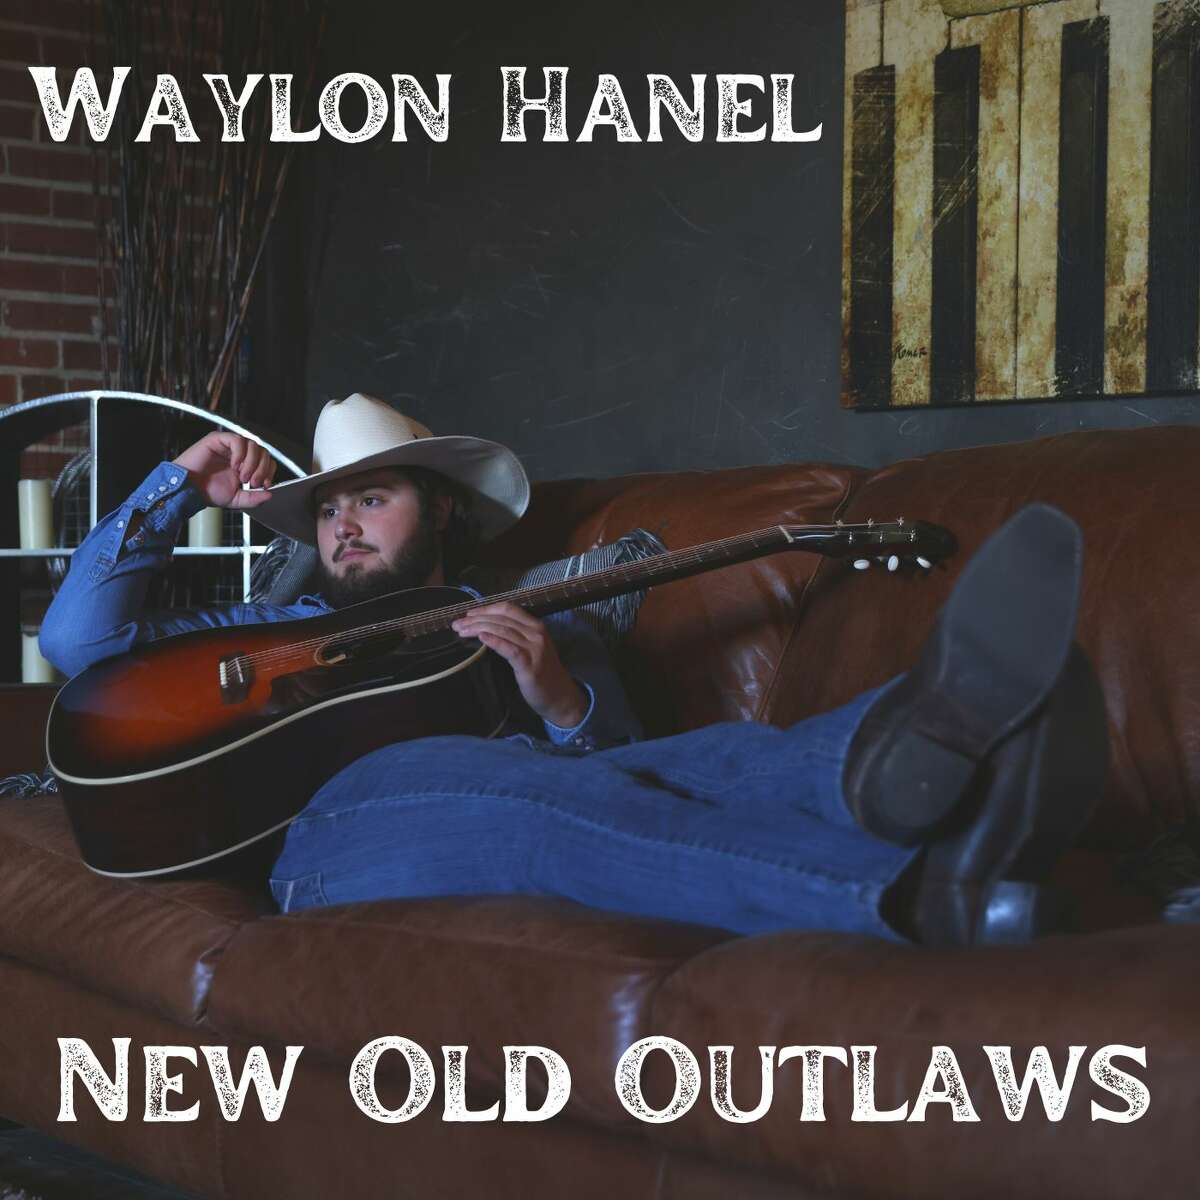 Waylon Hanel will be performing at the Bay City Country Music Fest with his debut album "New Old Outlaws" along with country music start Mitchell Tenpenny.